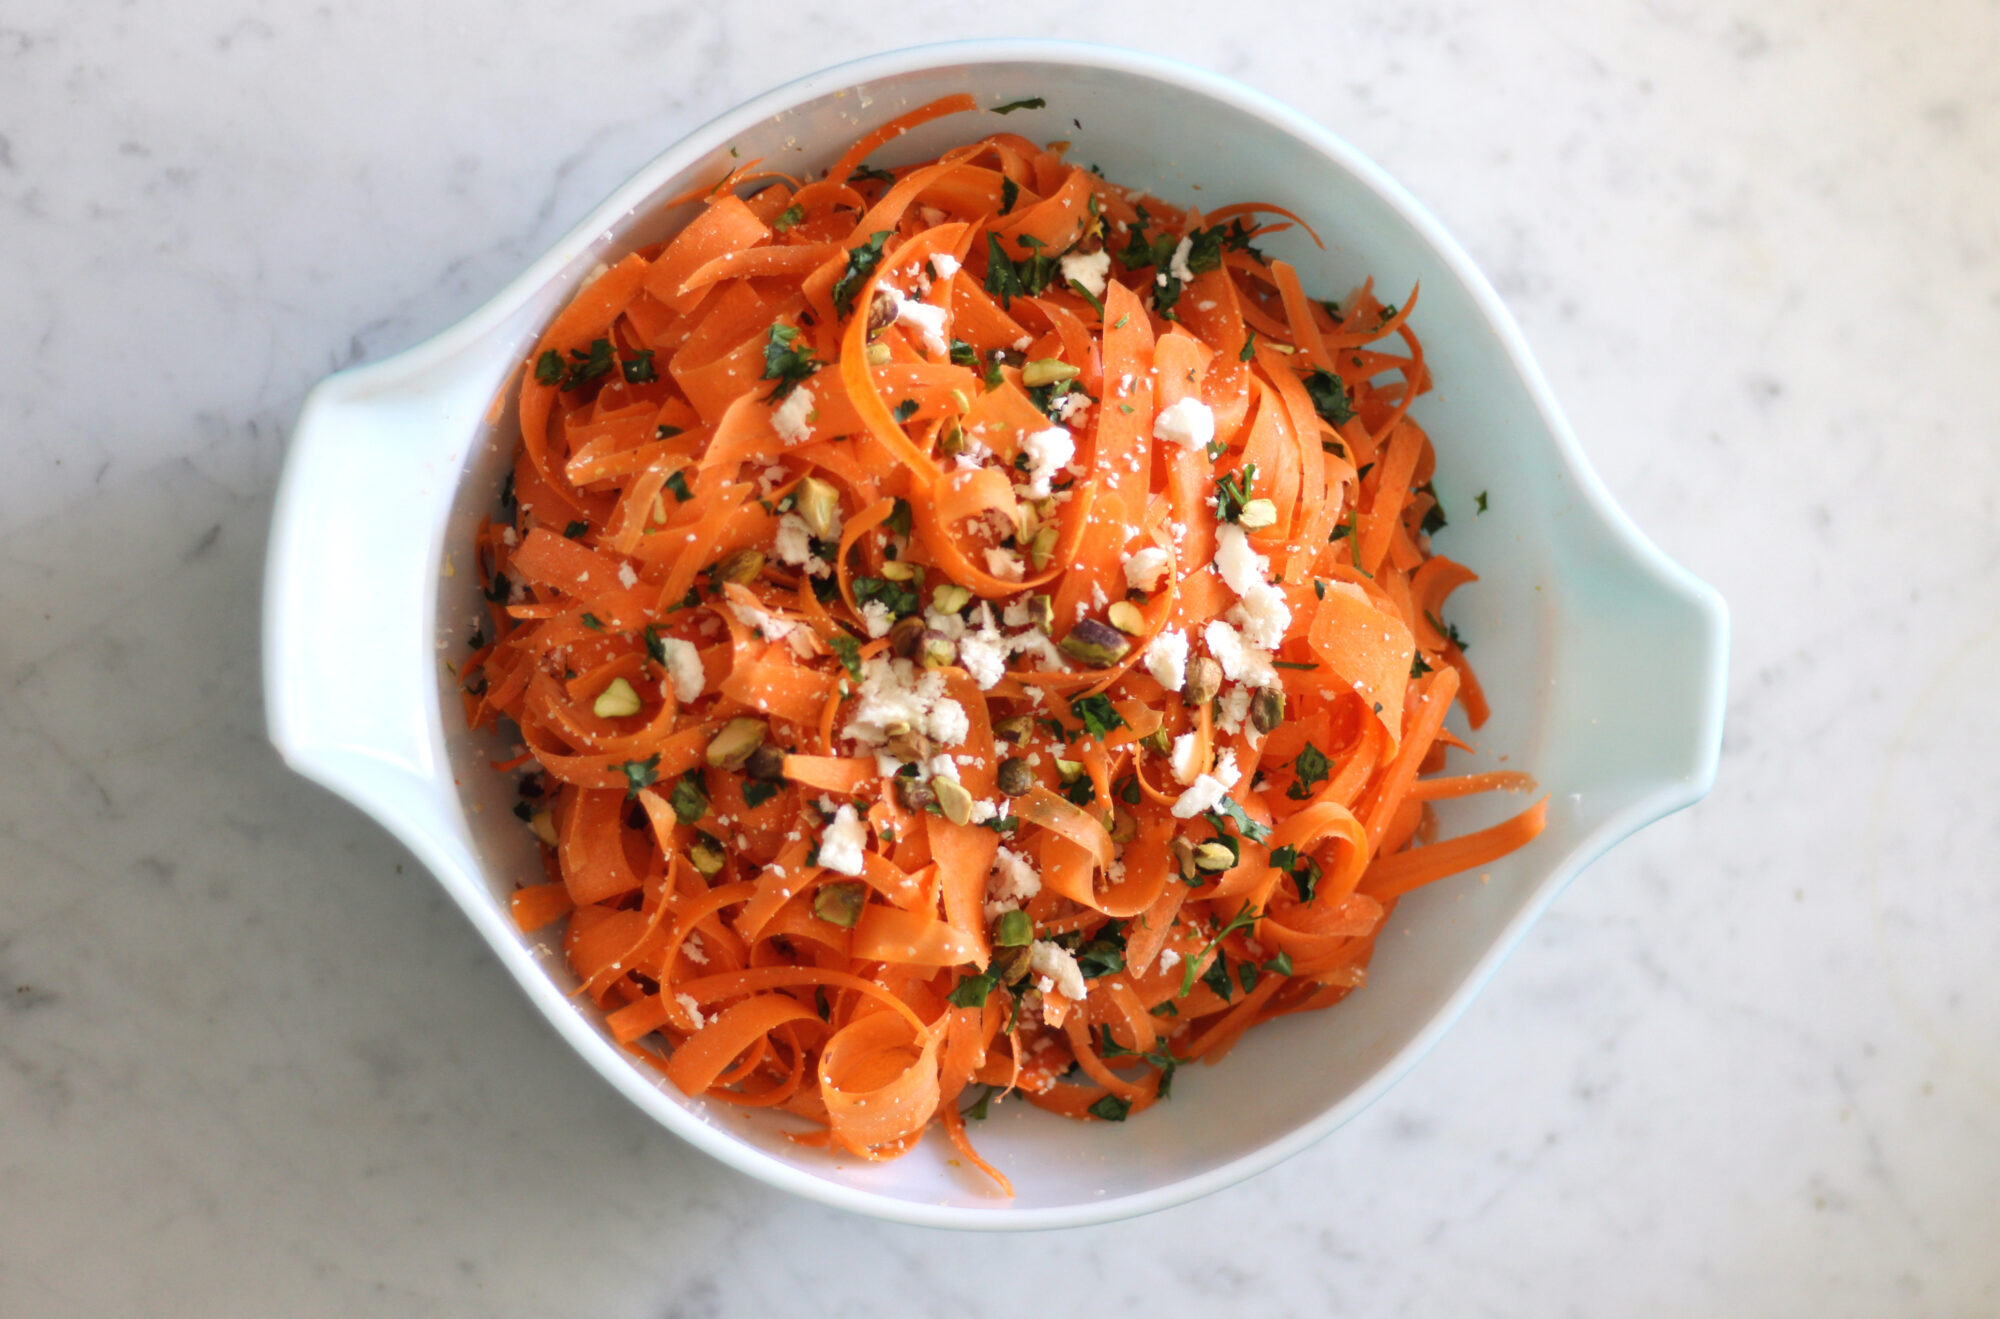 Carrot Salad with Queso Fresco, Pistachios, & Shallot Dressing